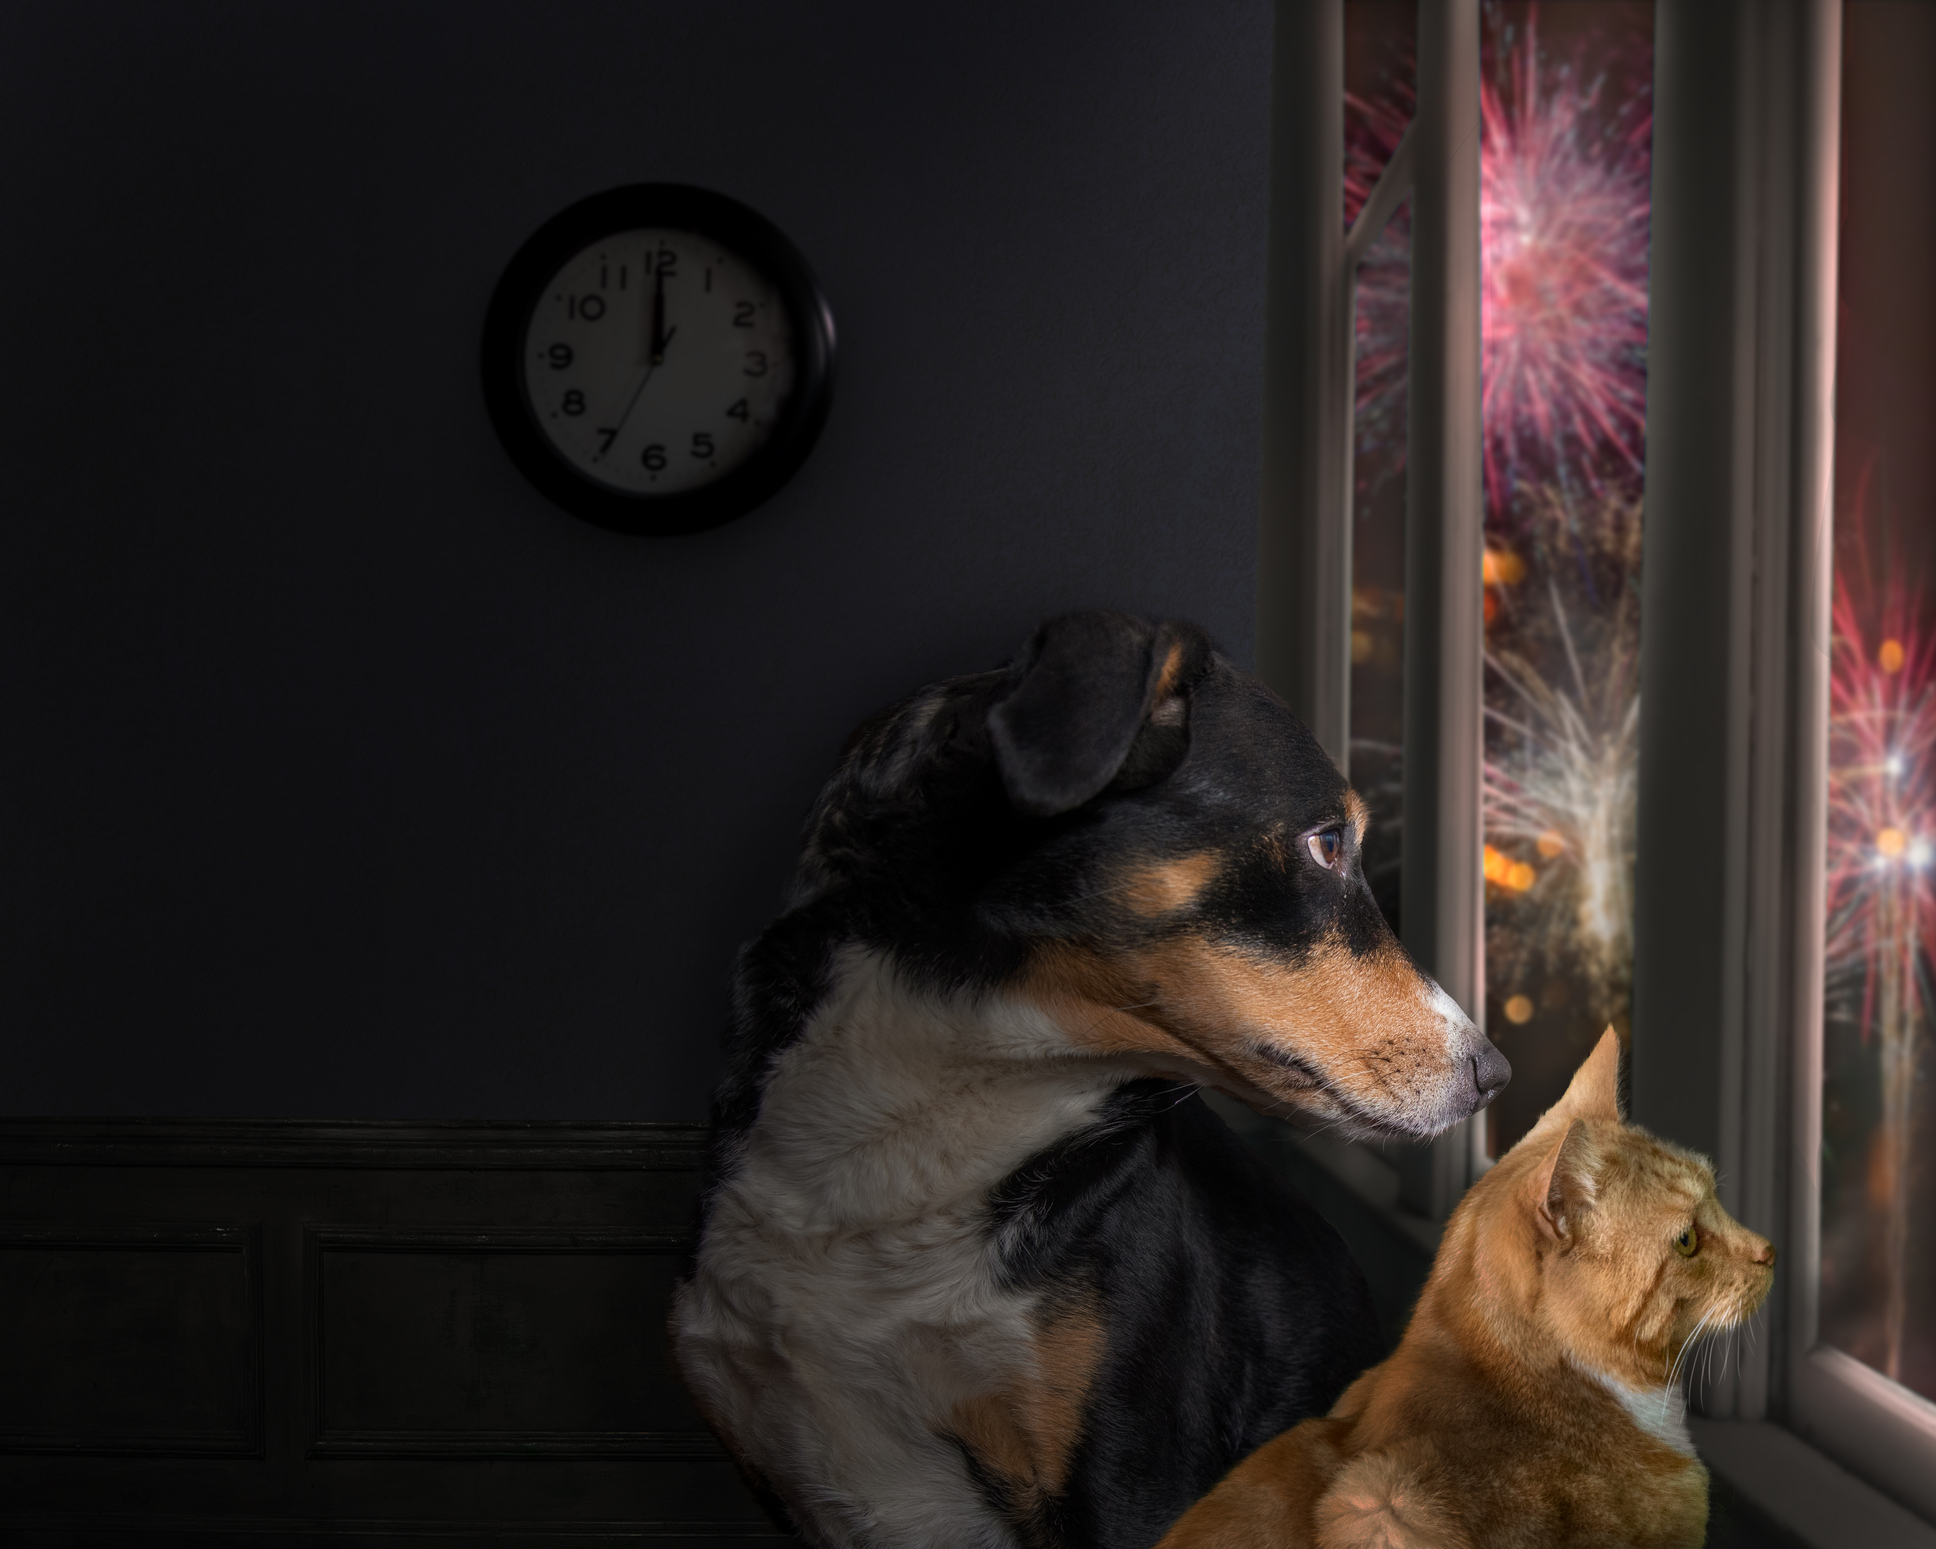 Anxious dog and cat watch fireworks through a window